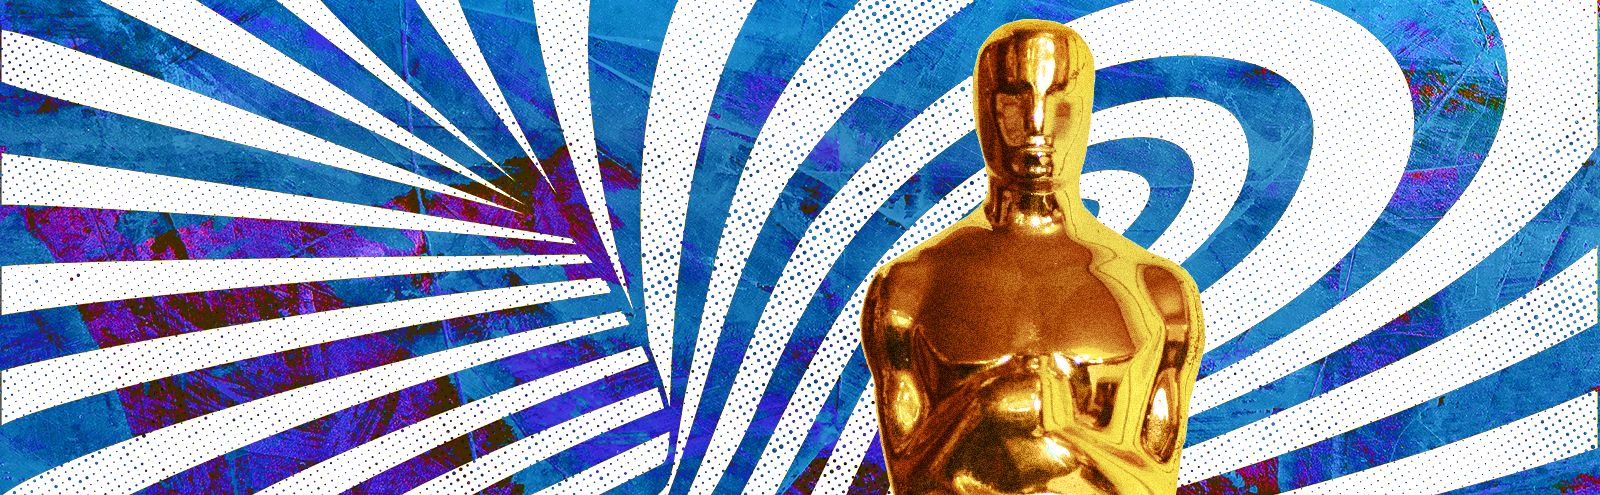 The Rundown: Three Terrible But Fun Ways To Fix And/Or Ruin The Next Oscars Ceremony